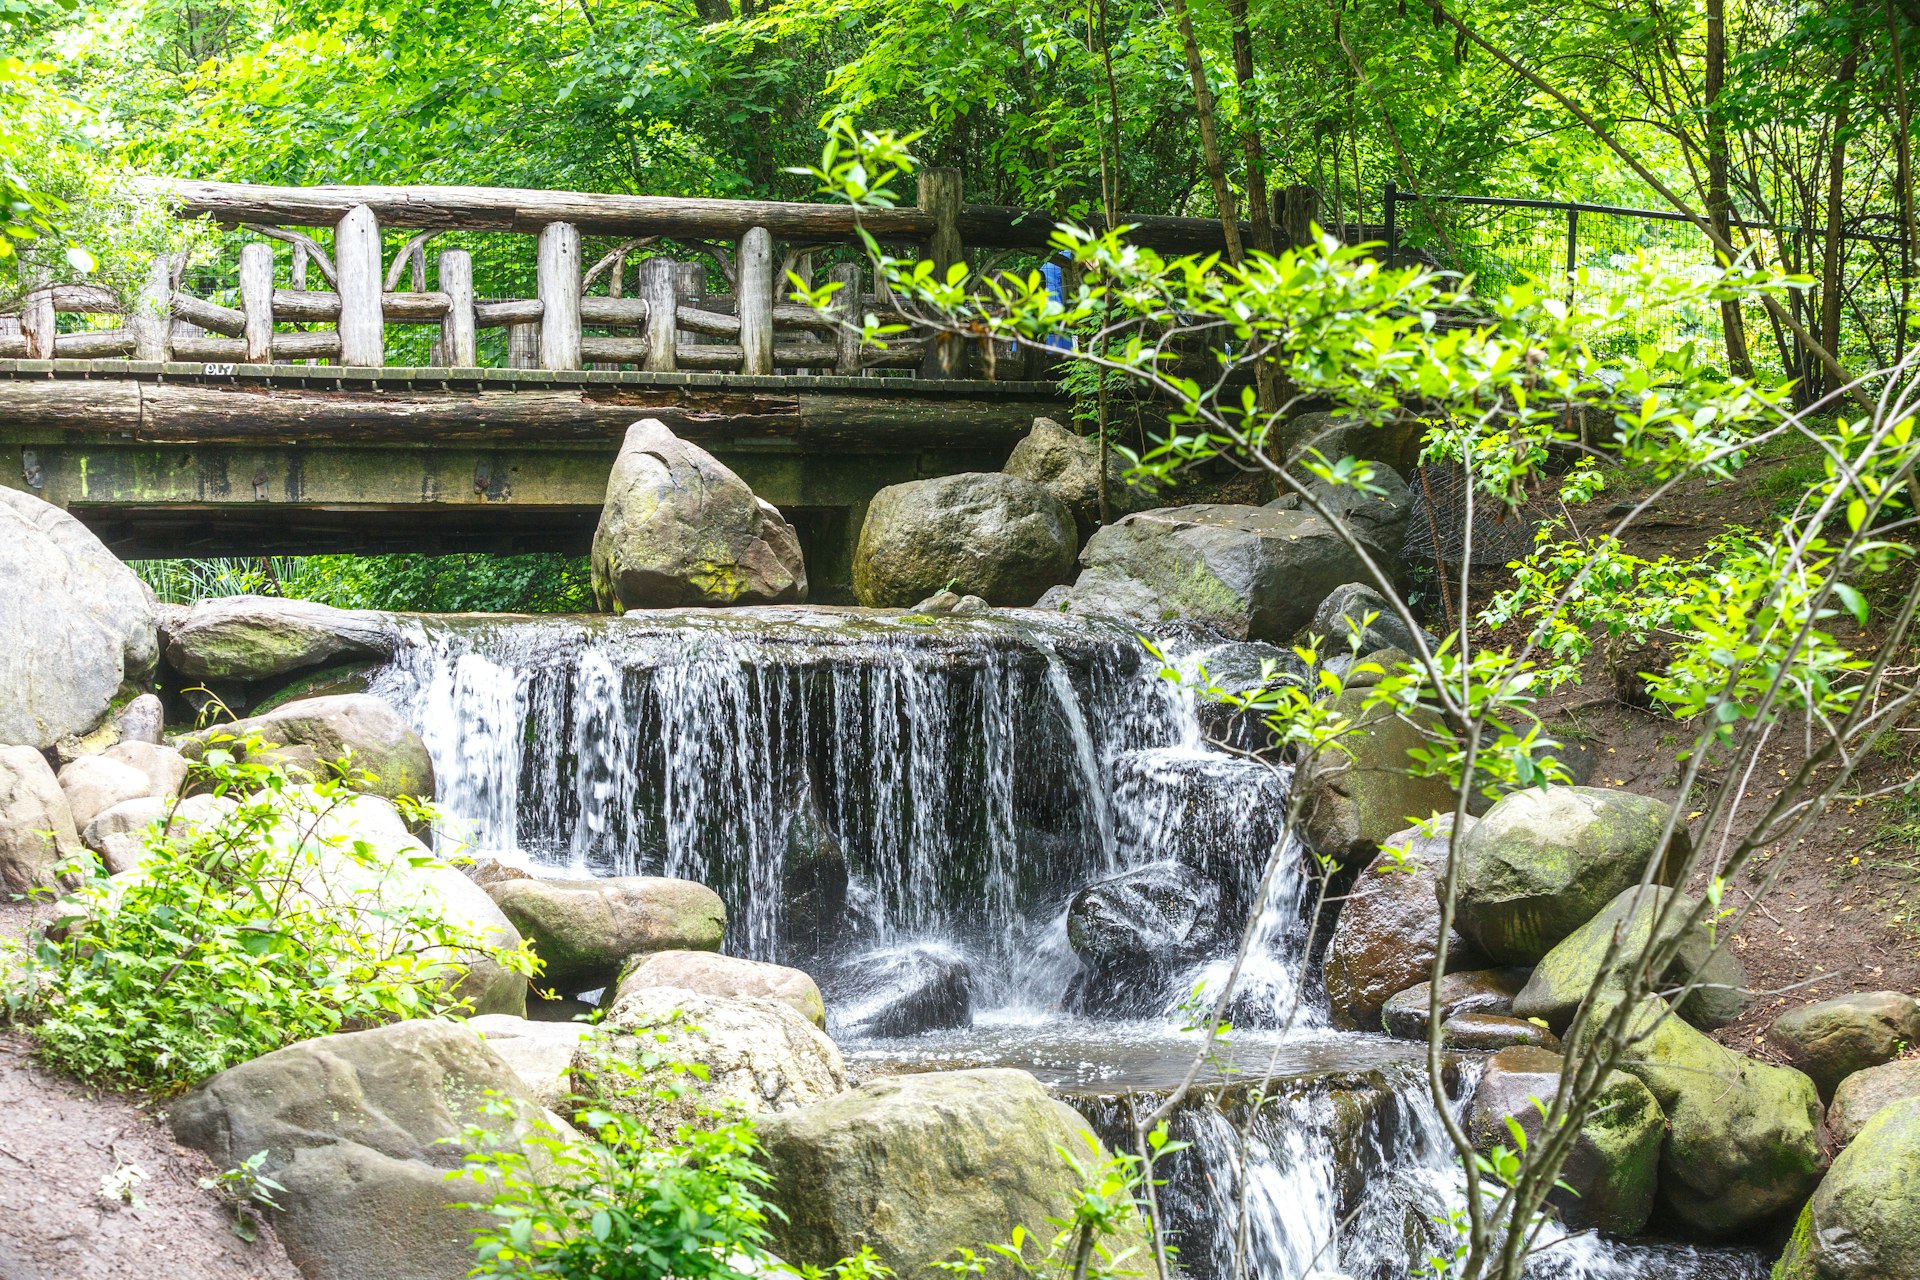 A small waterfall and bridge at Prospect Park in Brooklyn